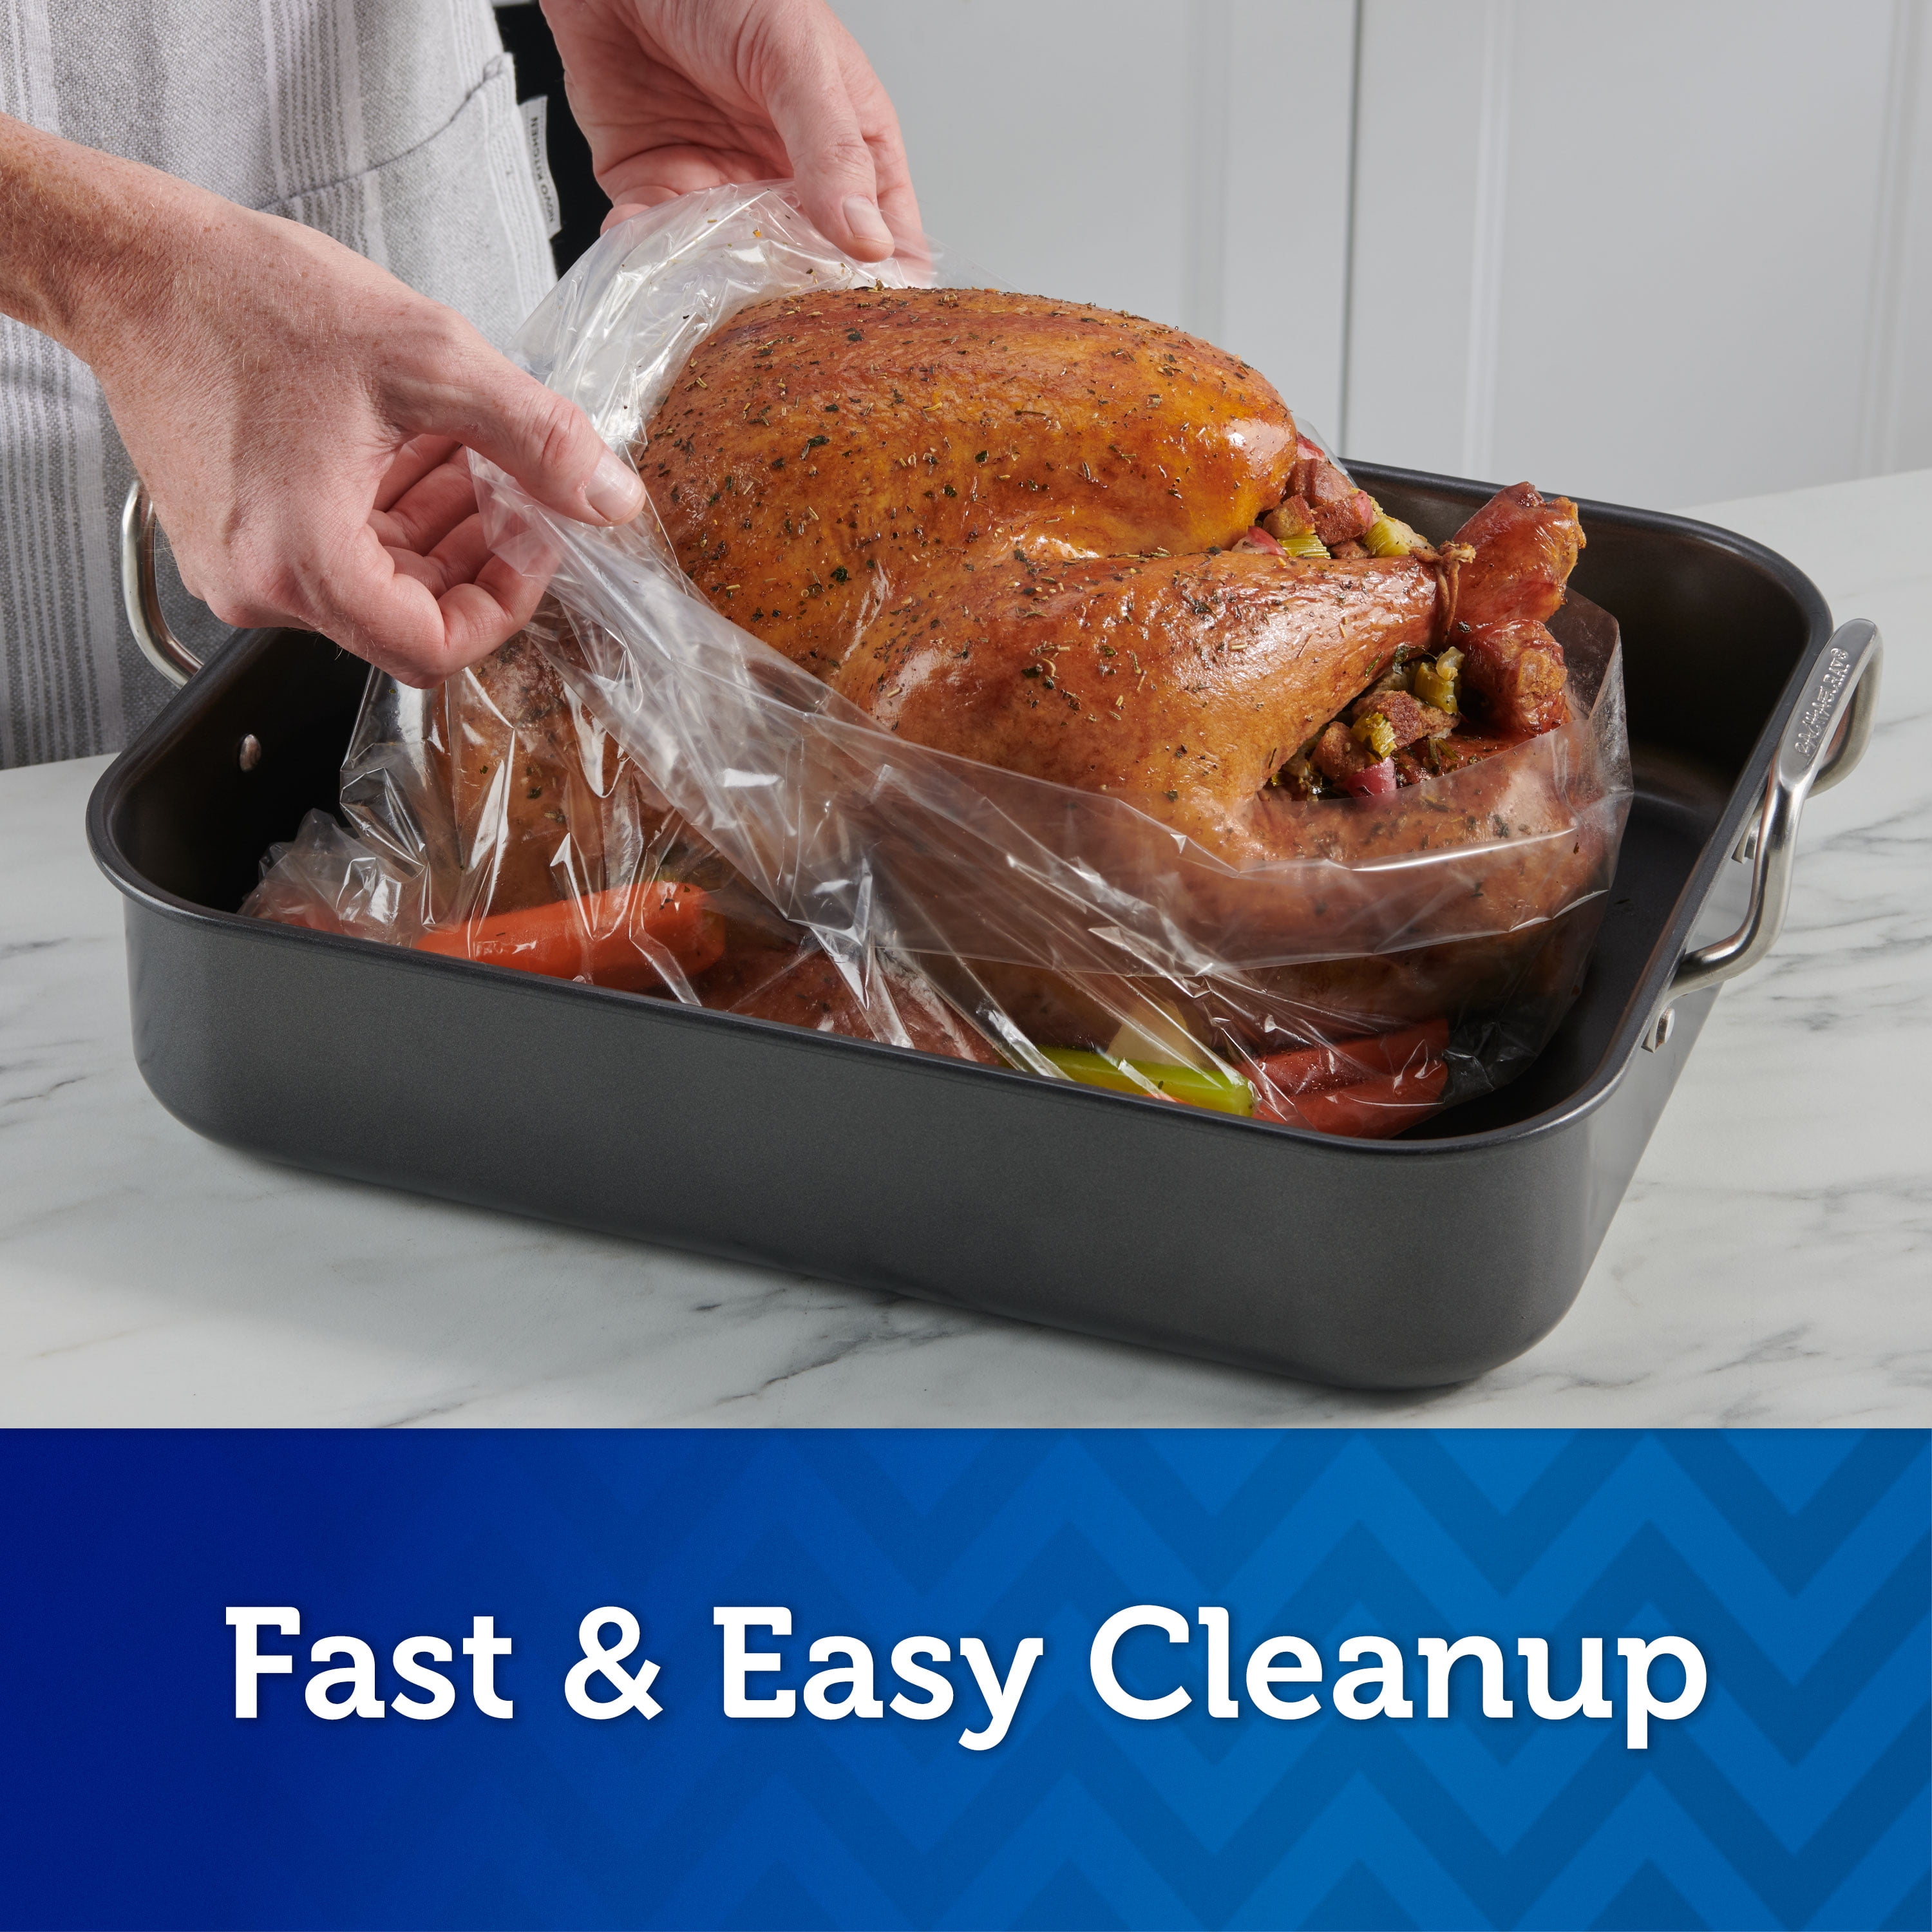 Pan Saver 2 Count Ovenable Turkey Roasting Bags